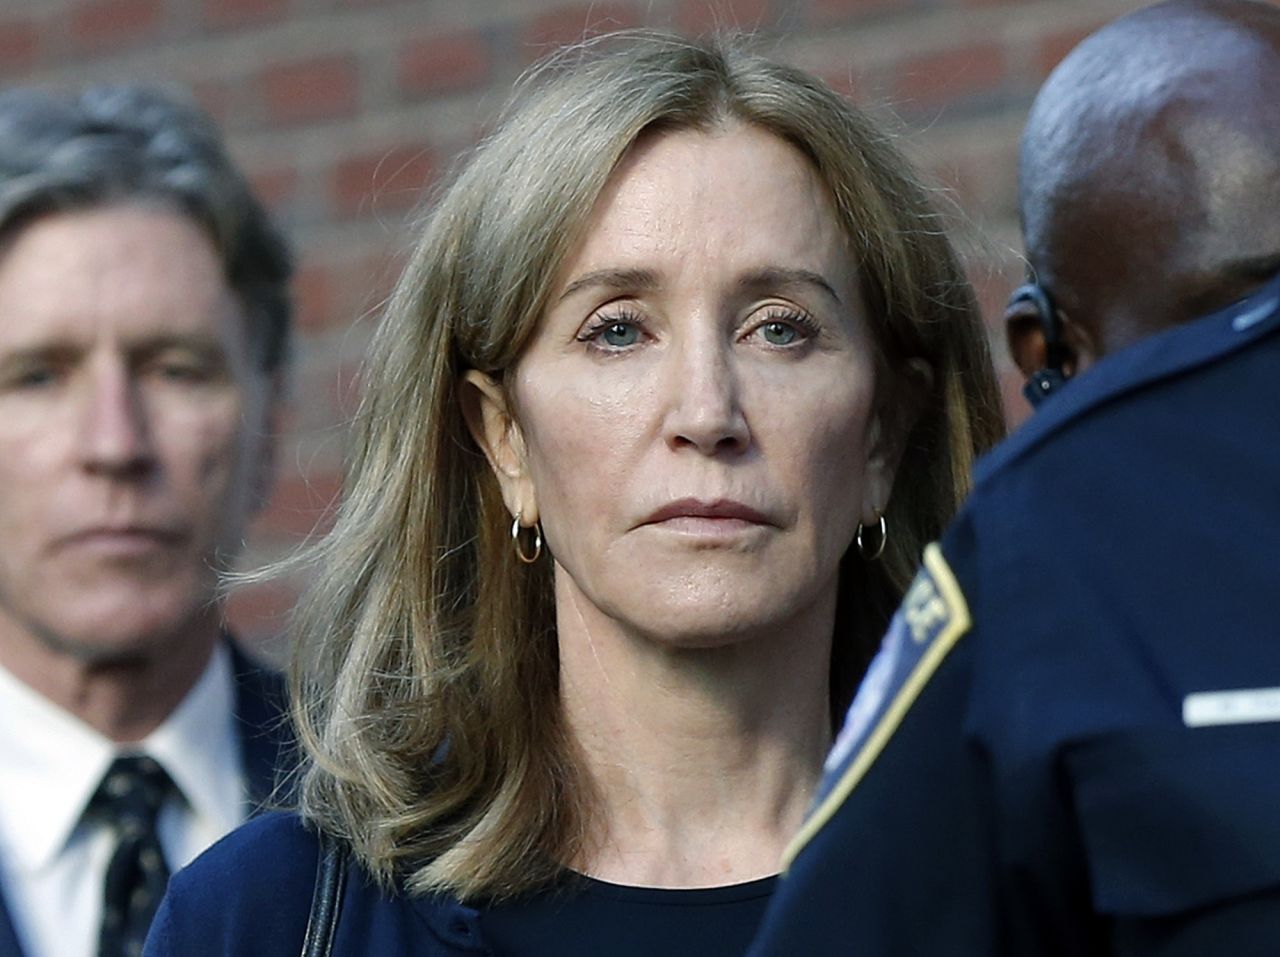 Felicity Huffman leaves federal court after she was sentenced to <a href="https://www.cnn.com/2019/09/13/us/felicity-huffman-sentencing/index.html" target="_blank">14 days in prison</a> following a nationwide college admissions bribery scandal, on Friday, September 13, in Boston. The "Desperate Housewives" actress also will have to serve a year of probation, perform 250 hours of community service and pay a $30,000 fine.